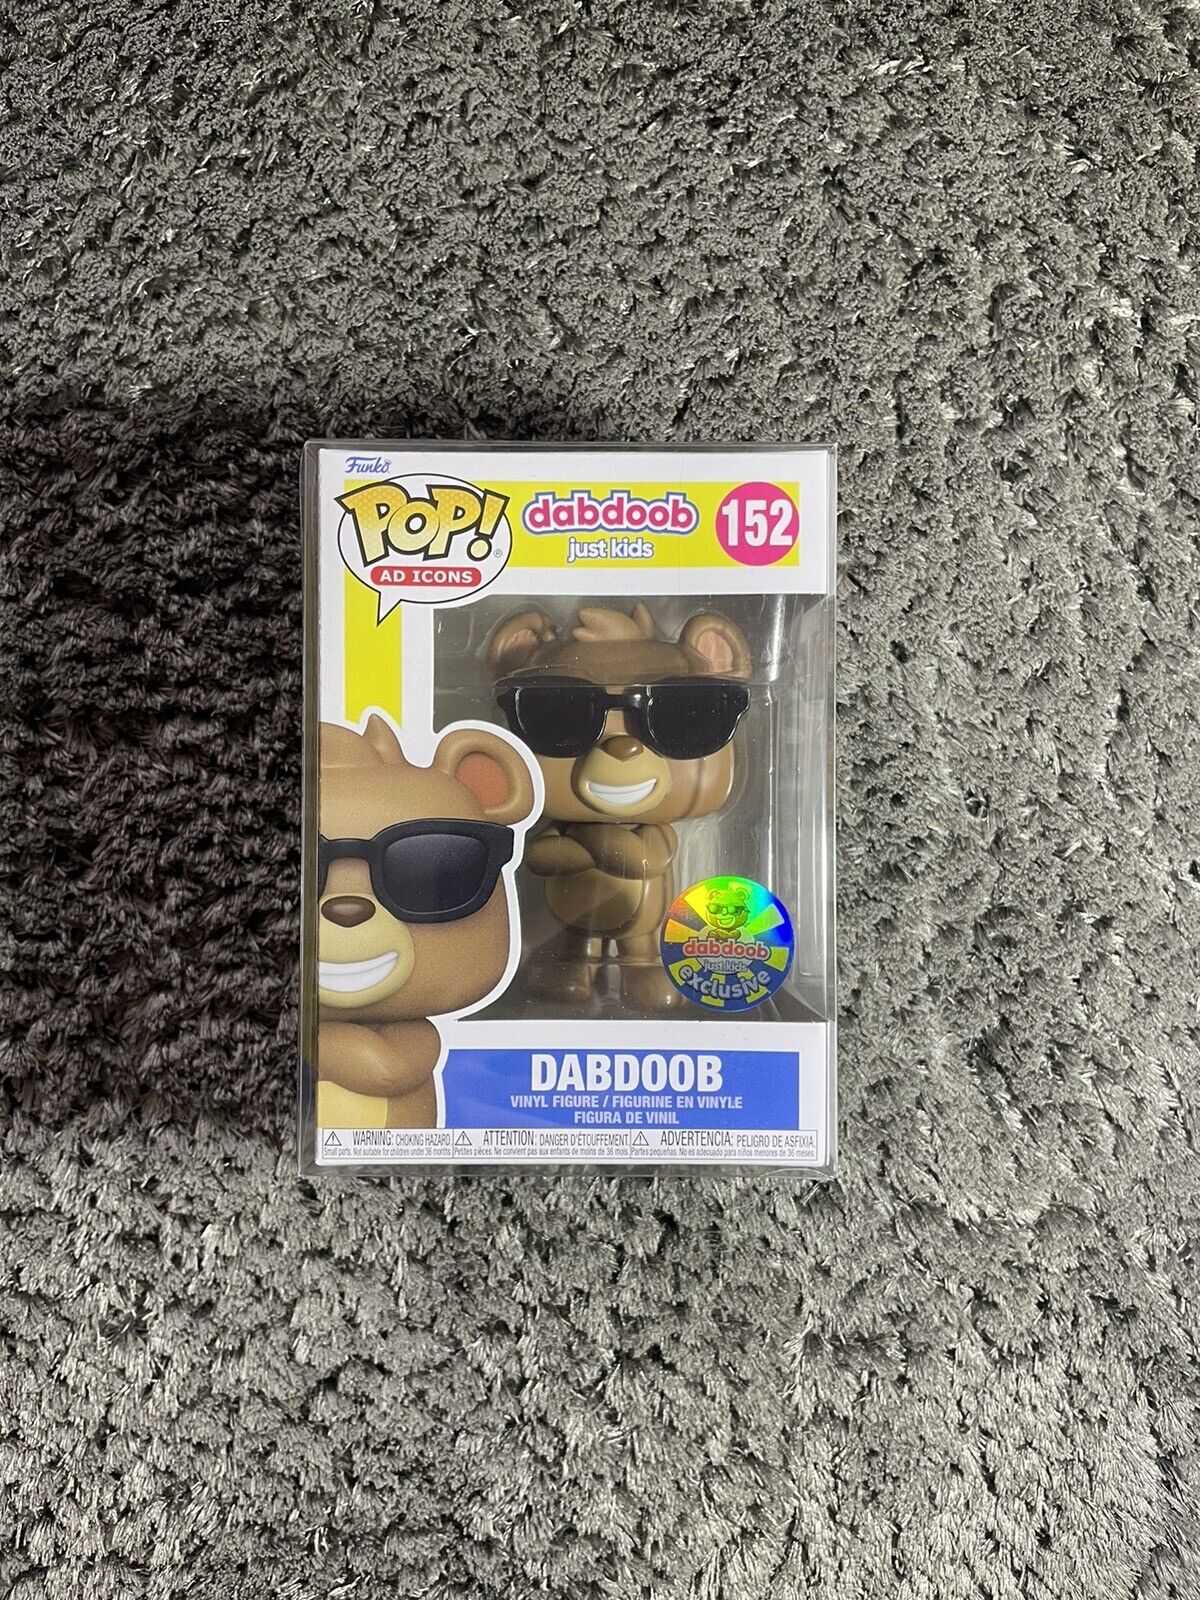 Funko POP Ad Icons Dabdoob Bear #152 (EXCLUSIVE NOT SOLD IN USA) (W/PROTECTOR)